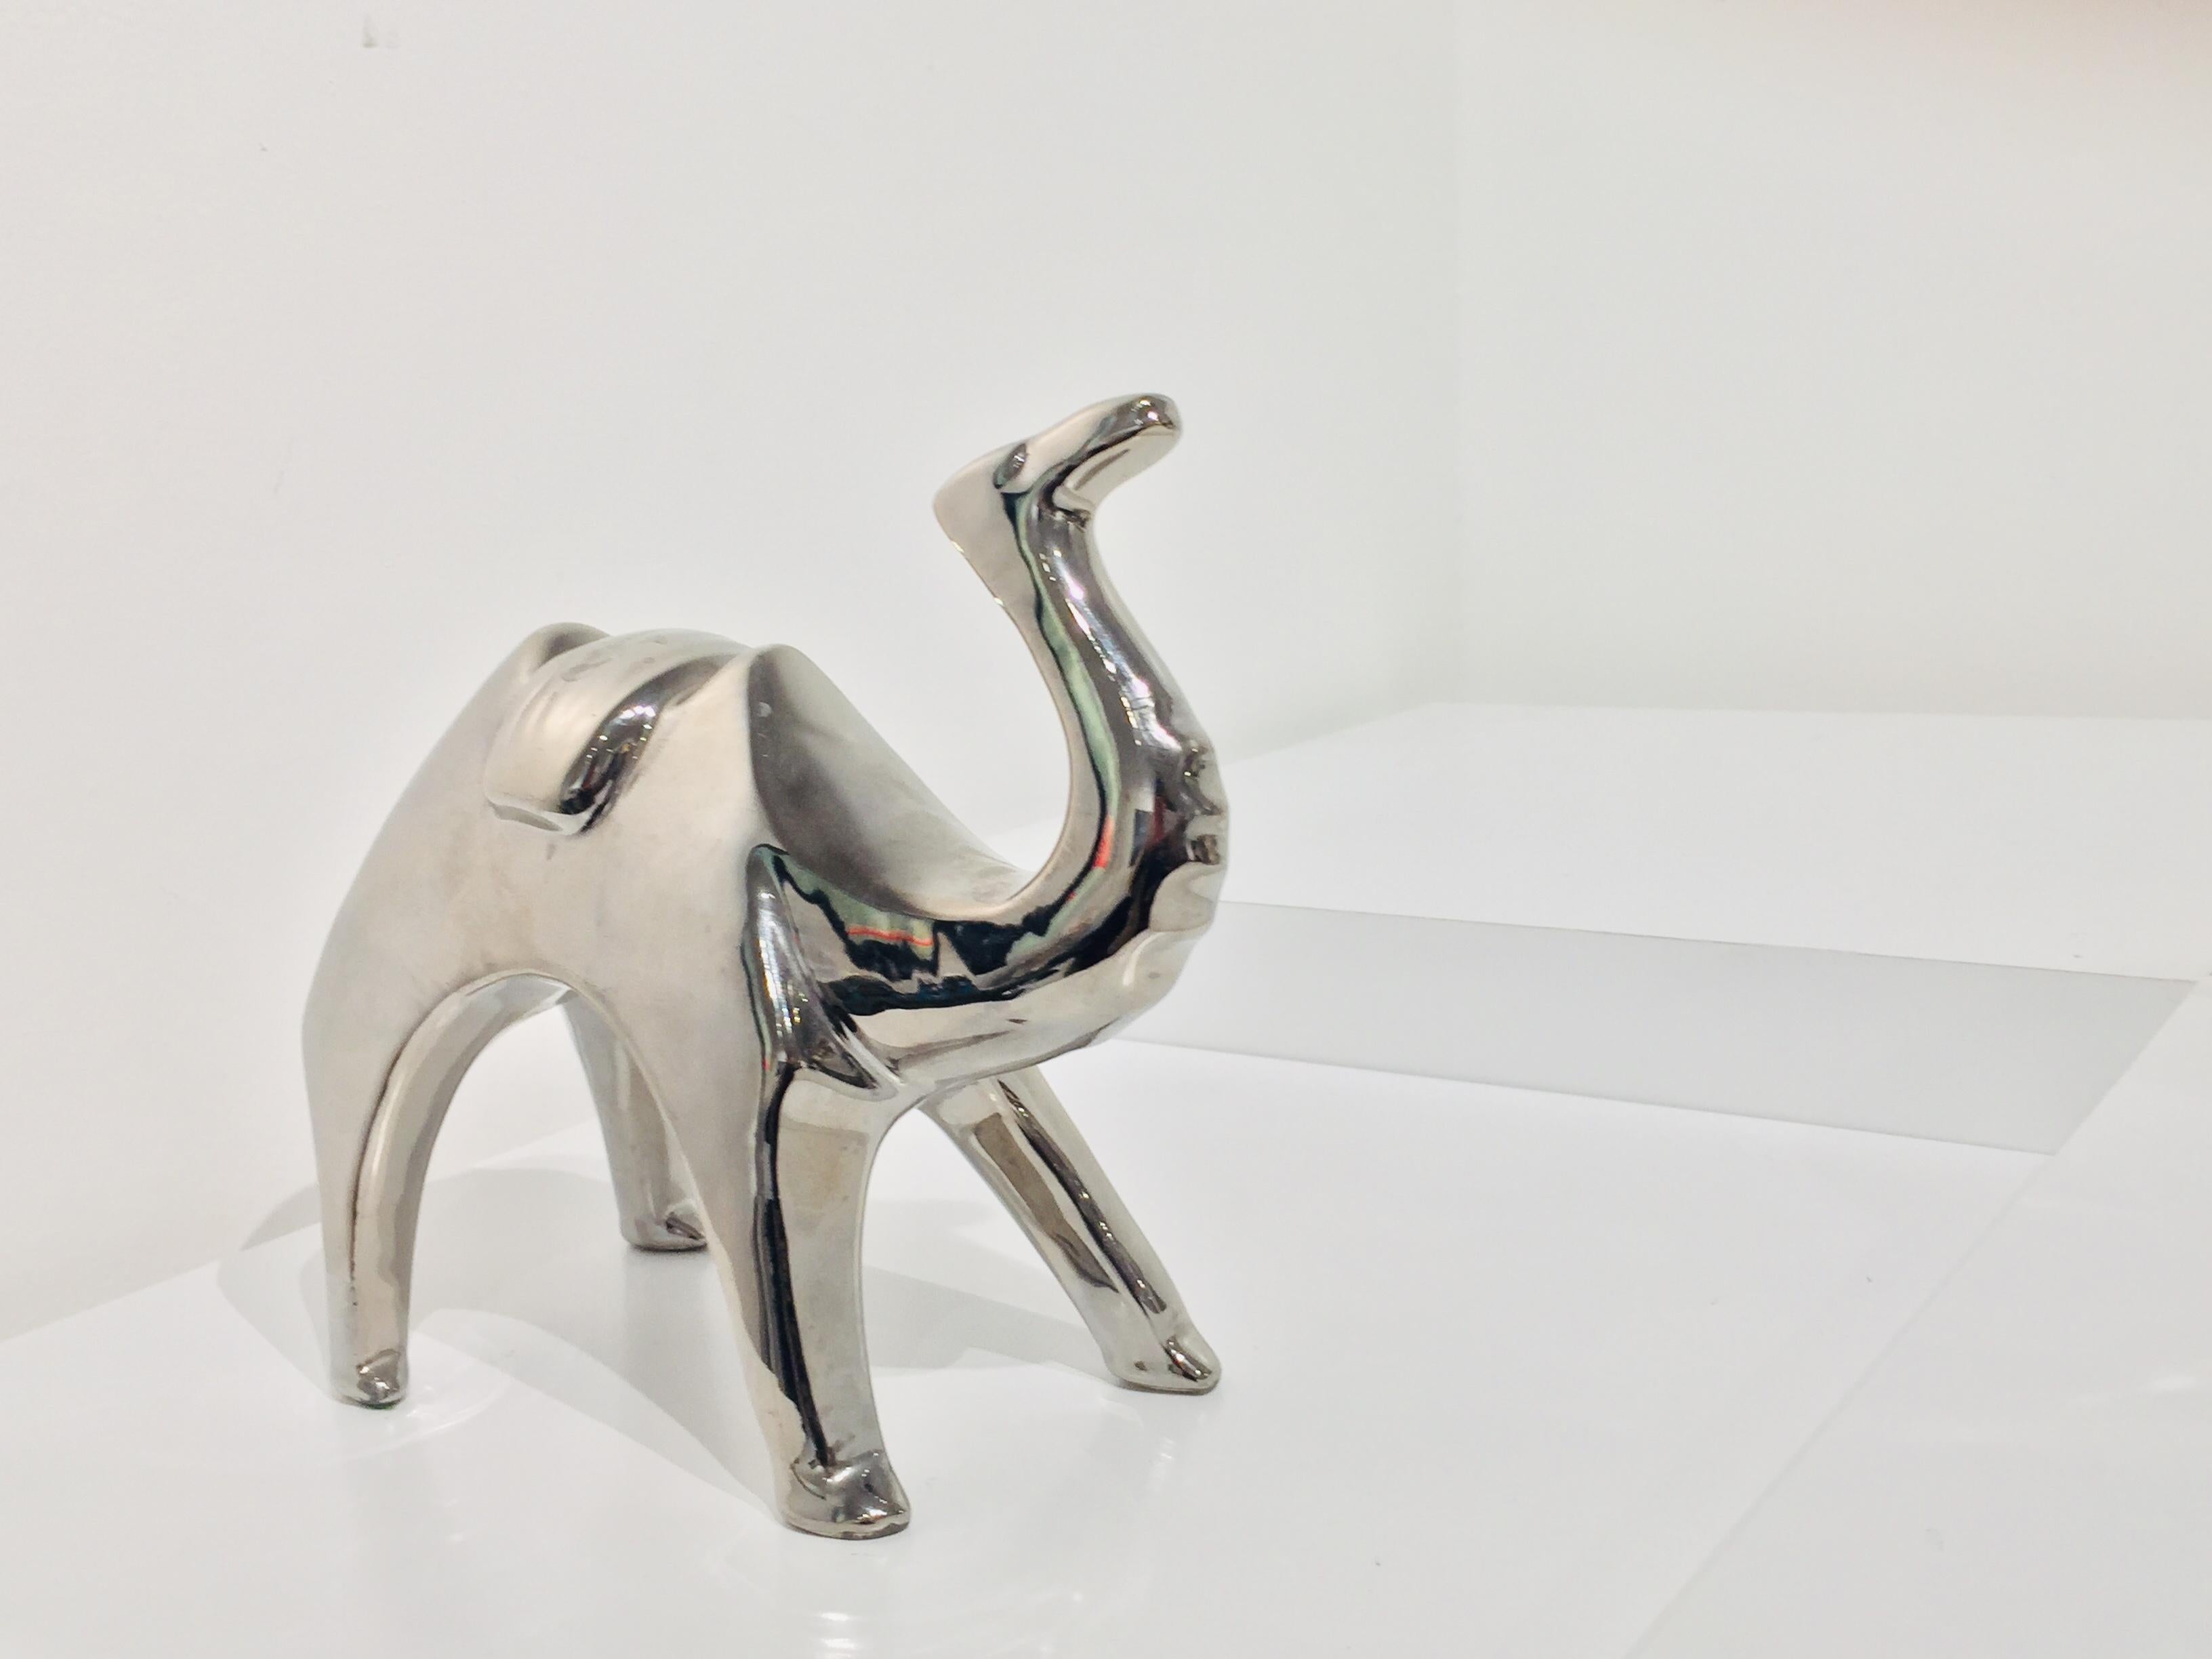 Contemporary ceramic camel with mirror finish. Color varies depending on the light and objects around it.